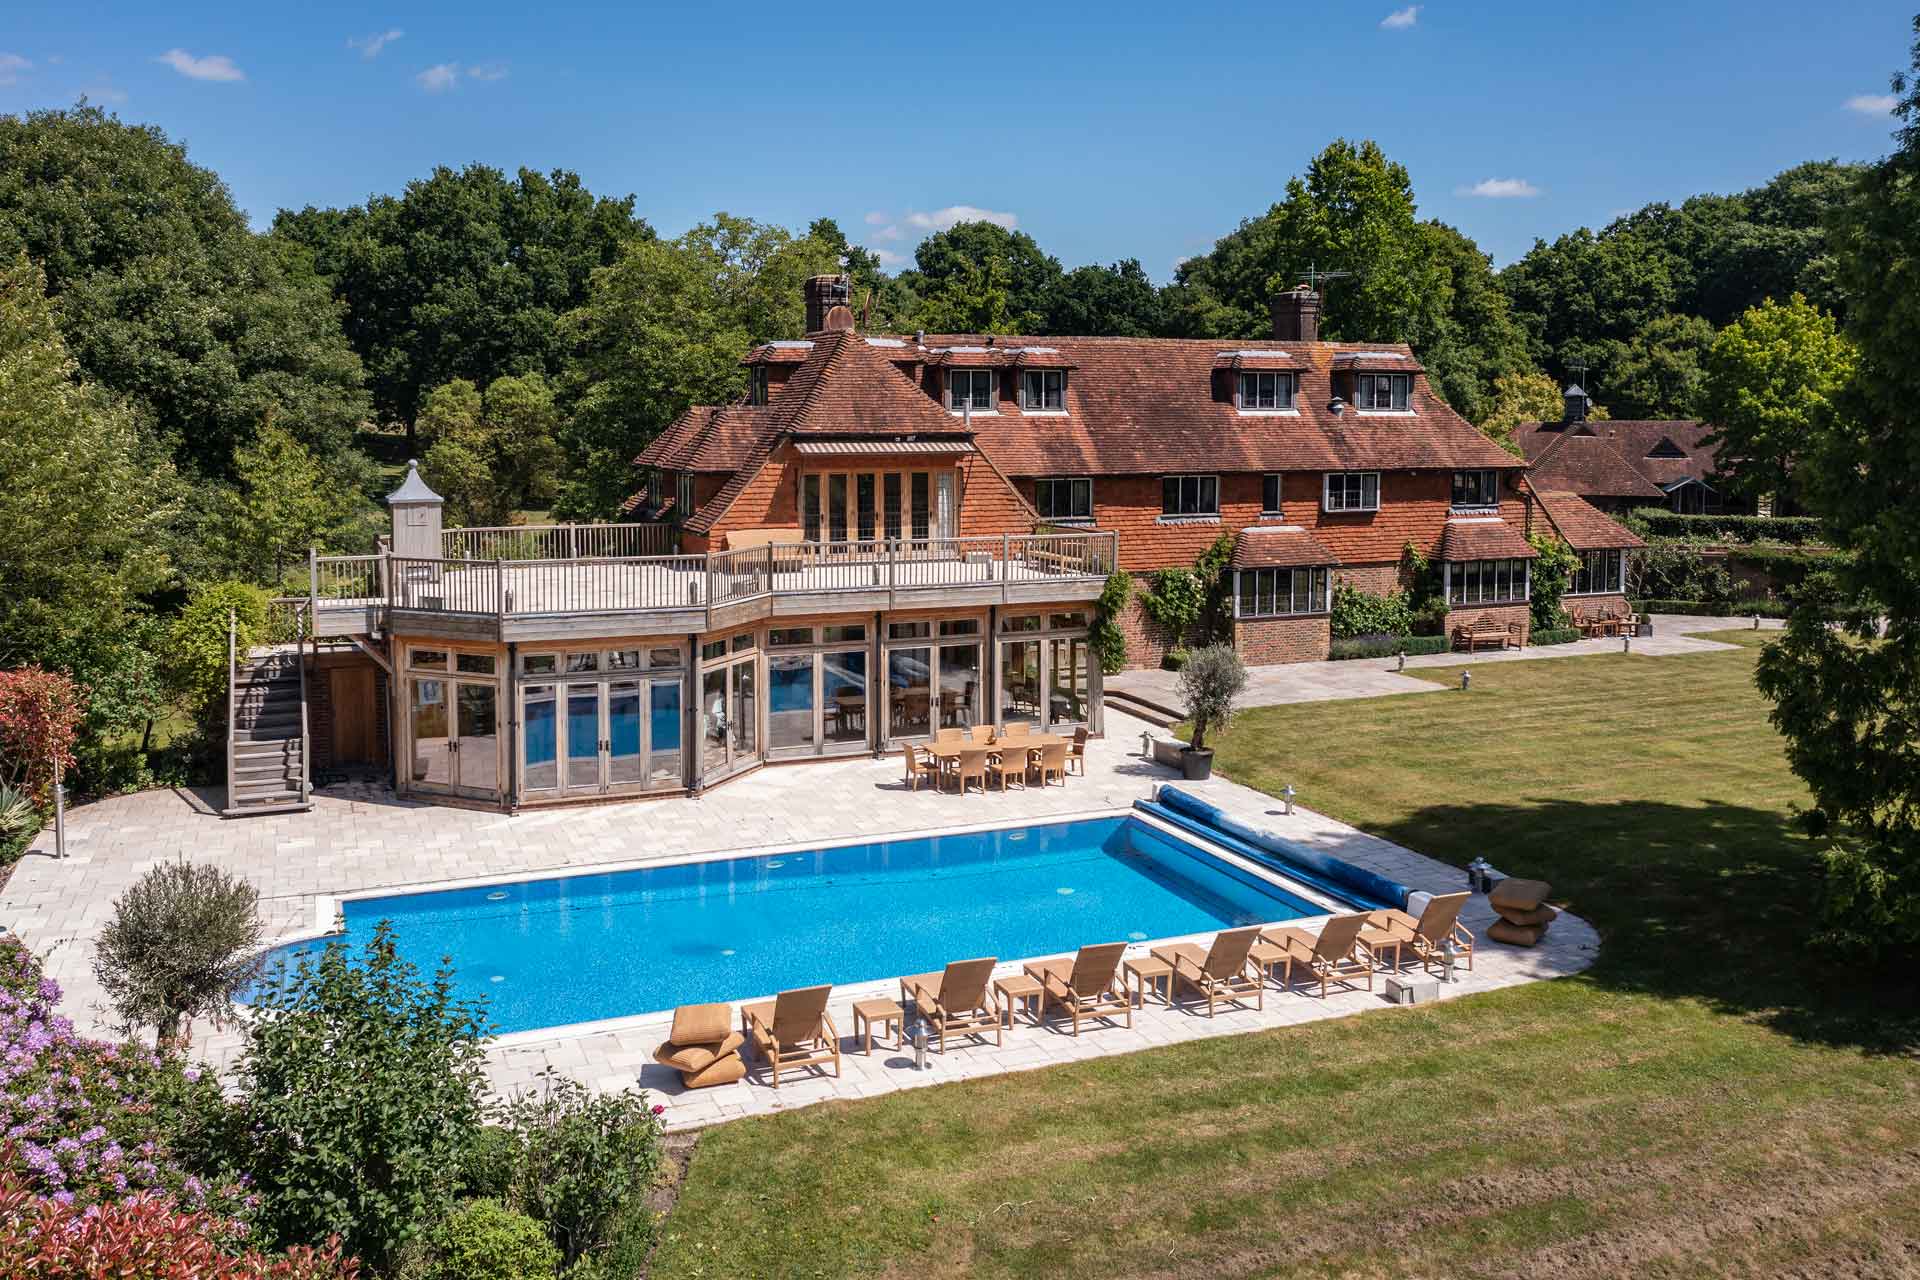 Exterior of red brick country home with outdoor pool